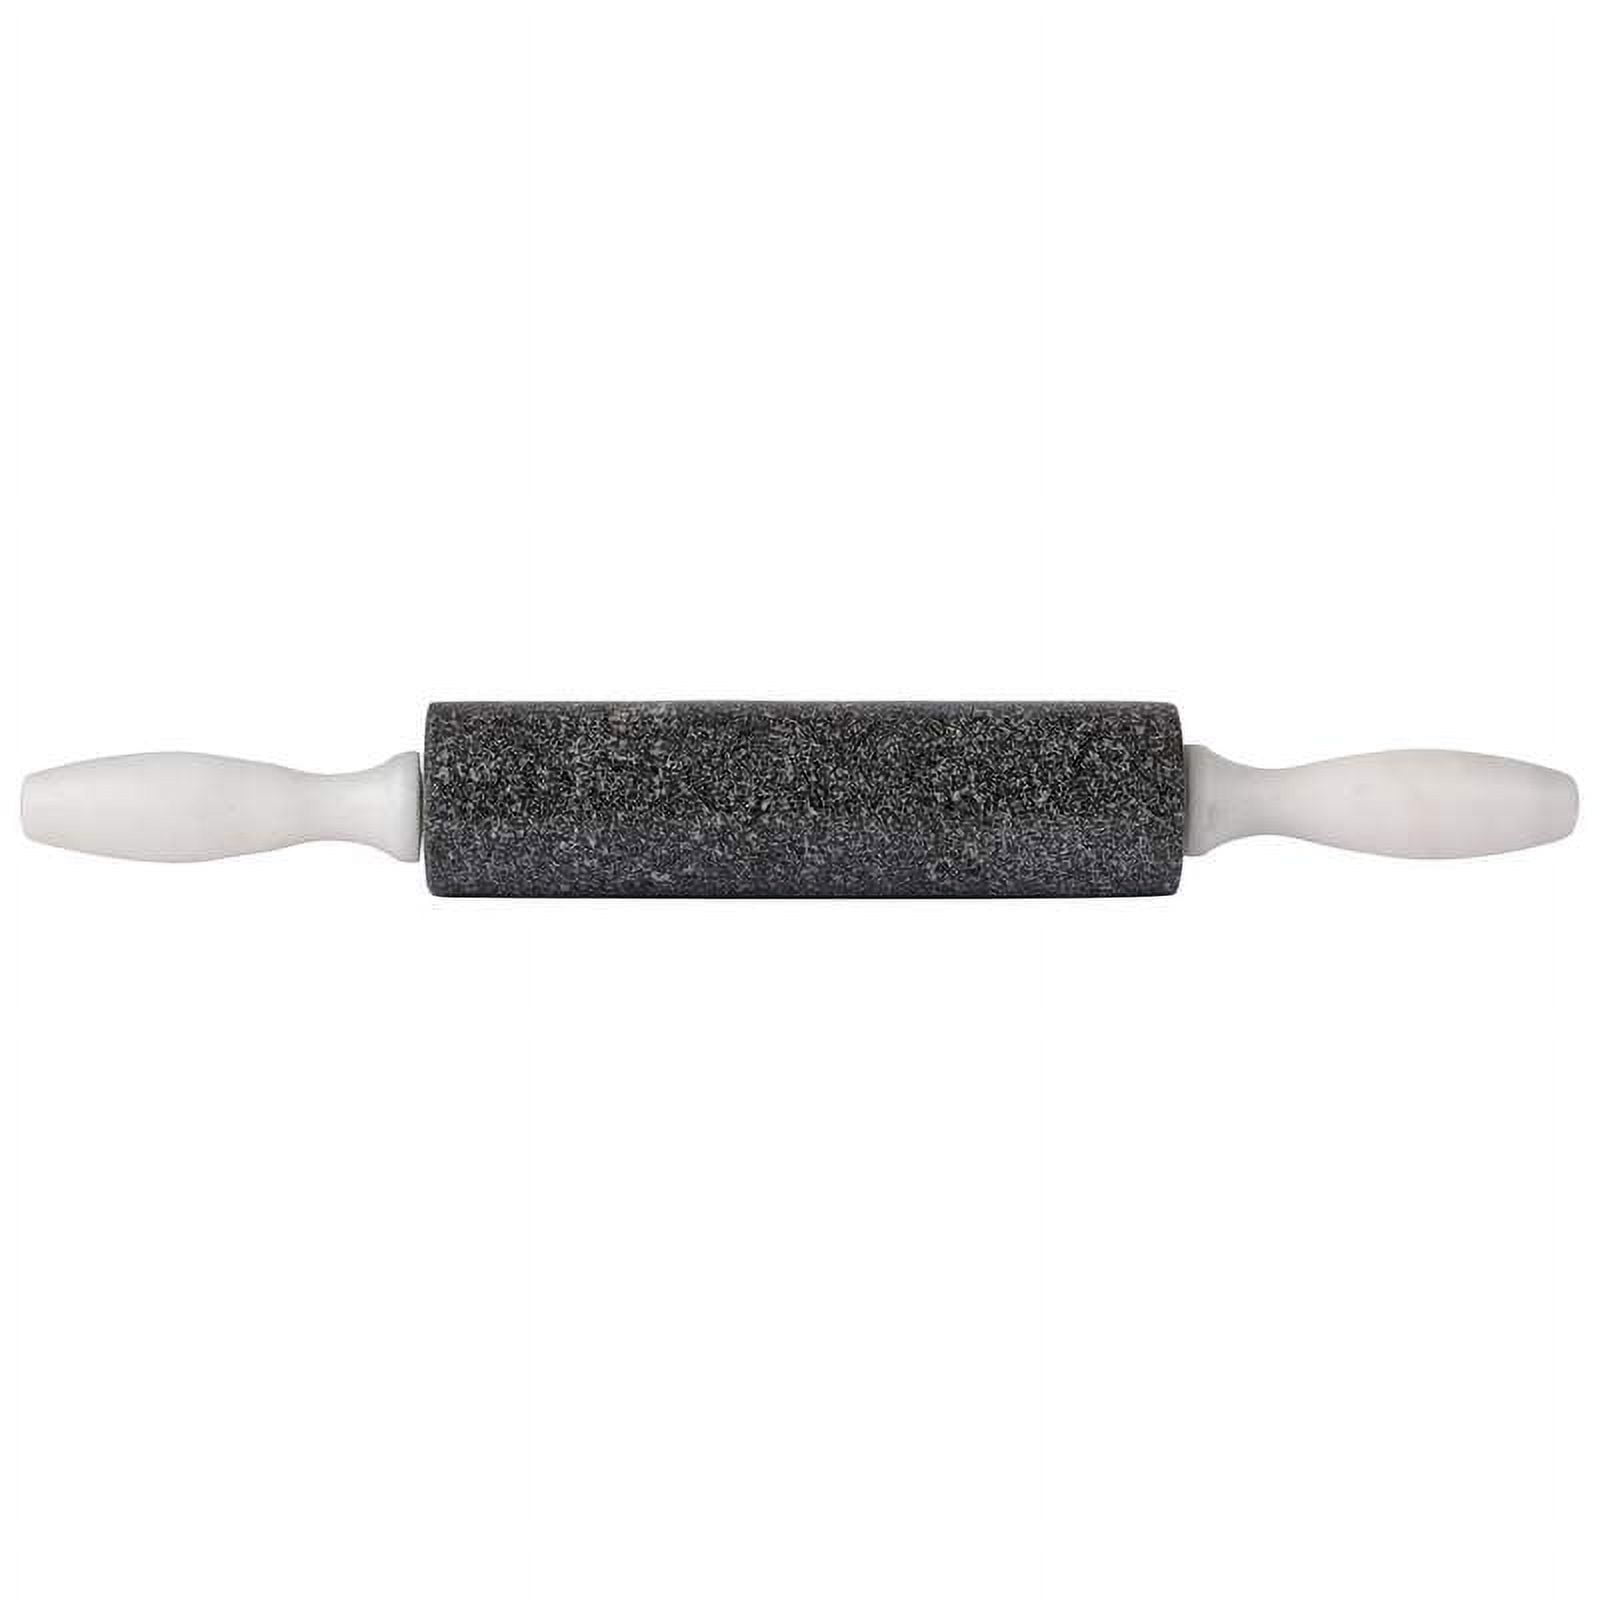 Picture of HealthSmart KTGRP 16 in. Charcoal Colored Granite Rolling Pin